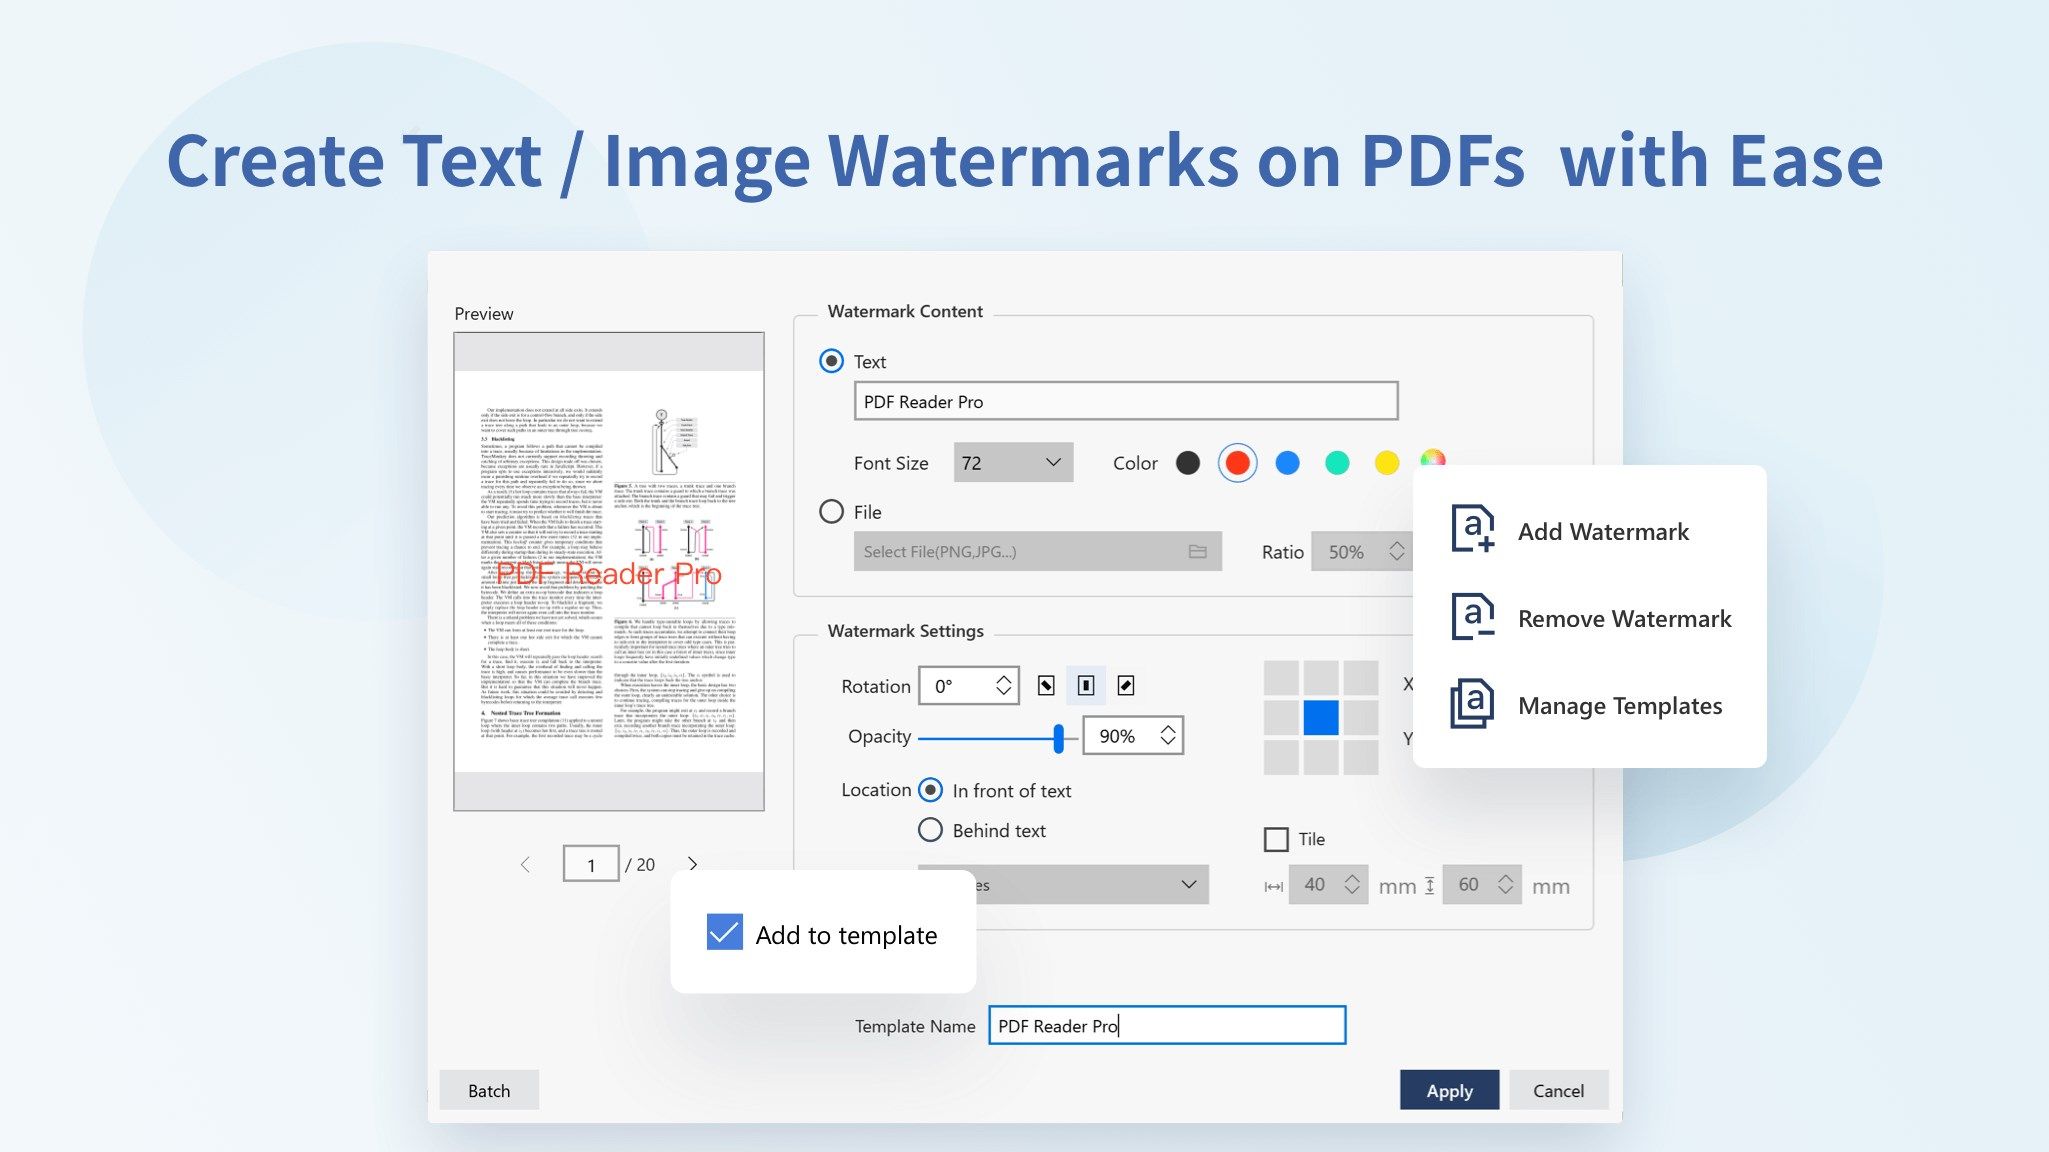 Create Text / Image Watermarks on PDFs with Ease